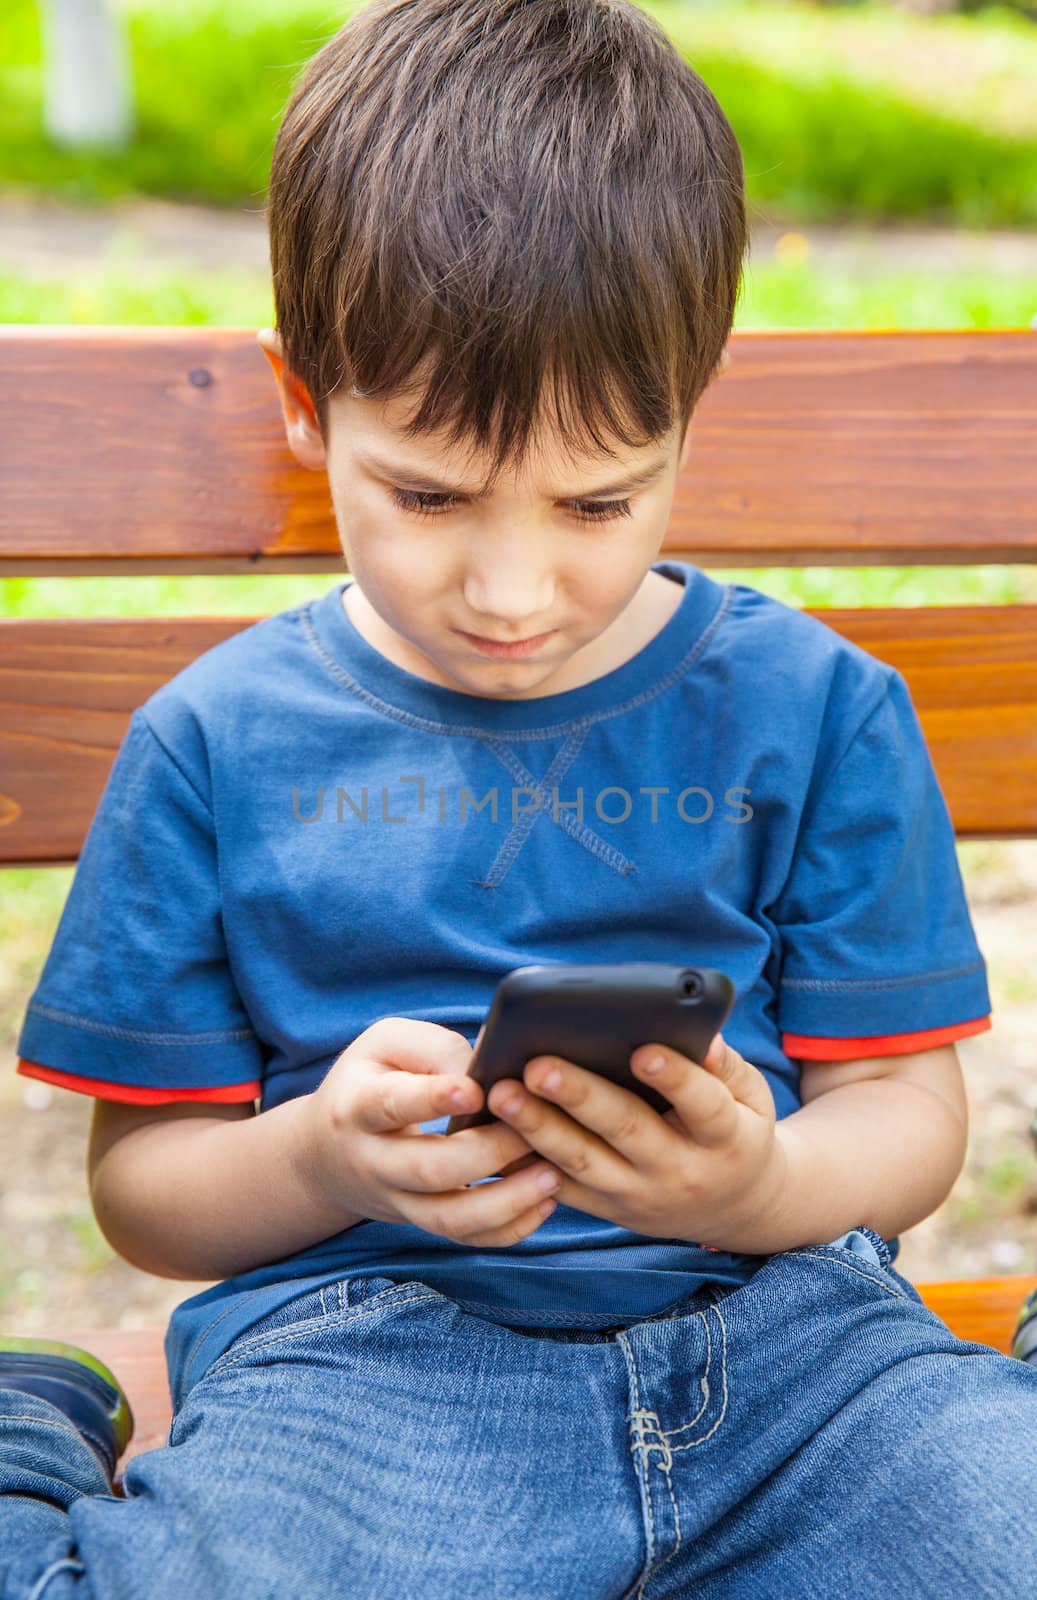 Little boy intently playing games on smartphone